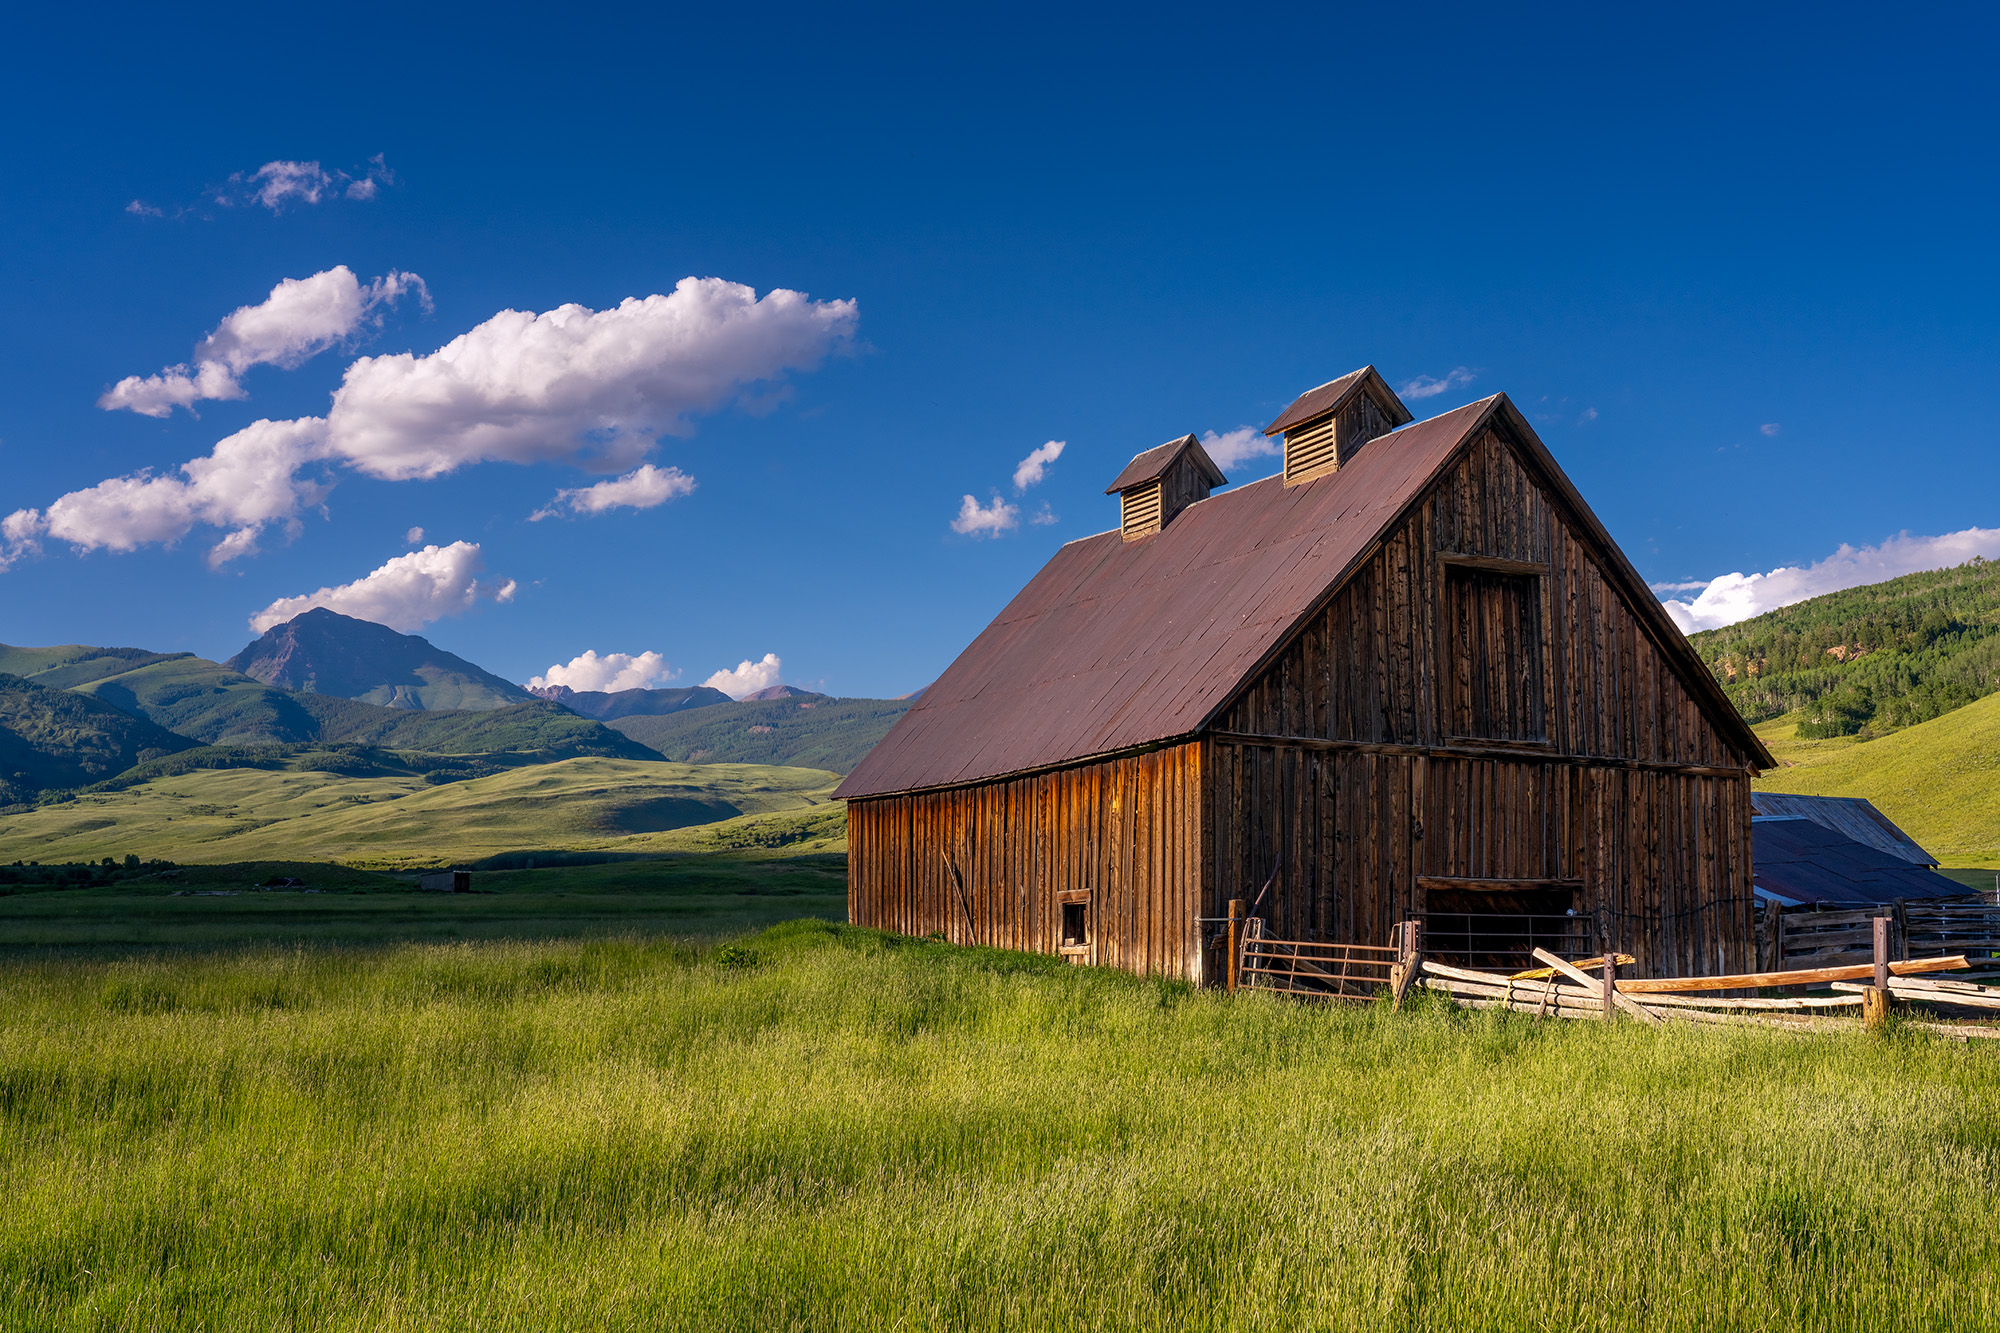 In the heart of Crested Butte, Colorado, I stumbled upon a well-preserved, weathered barn, a rustic sentinel of times past. This...